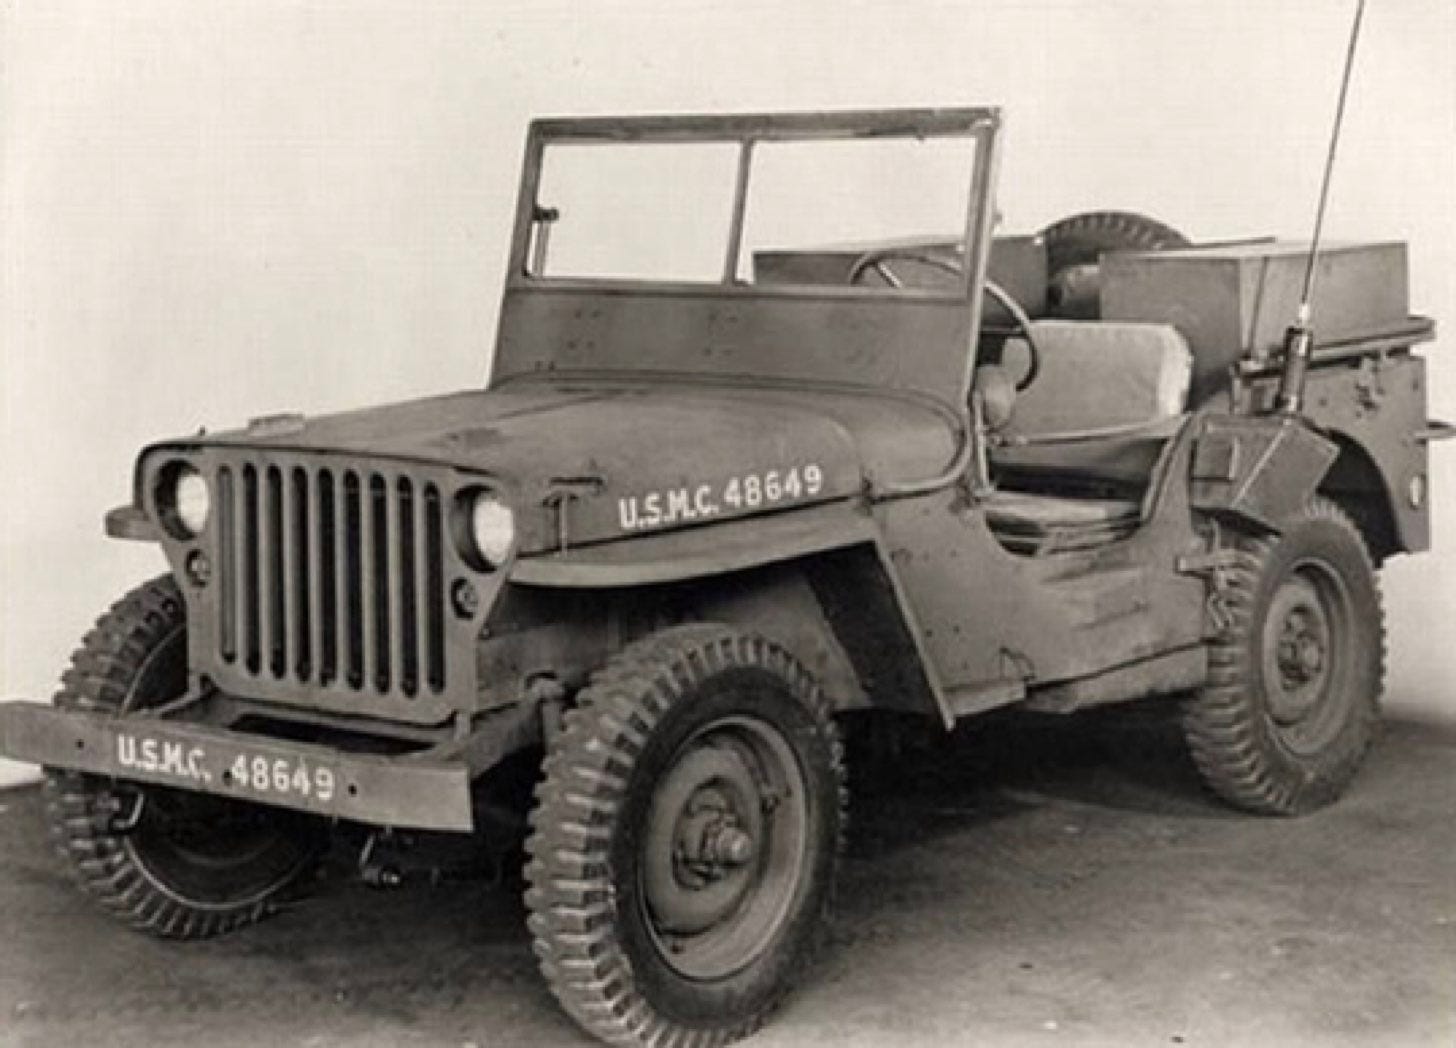 Send in the Jeeps (1941-1943)